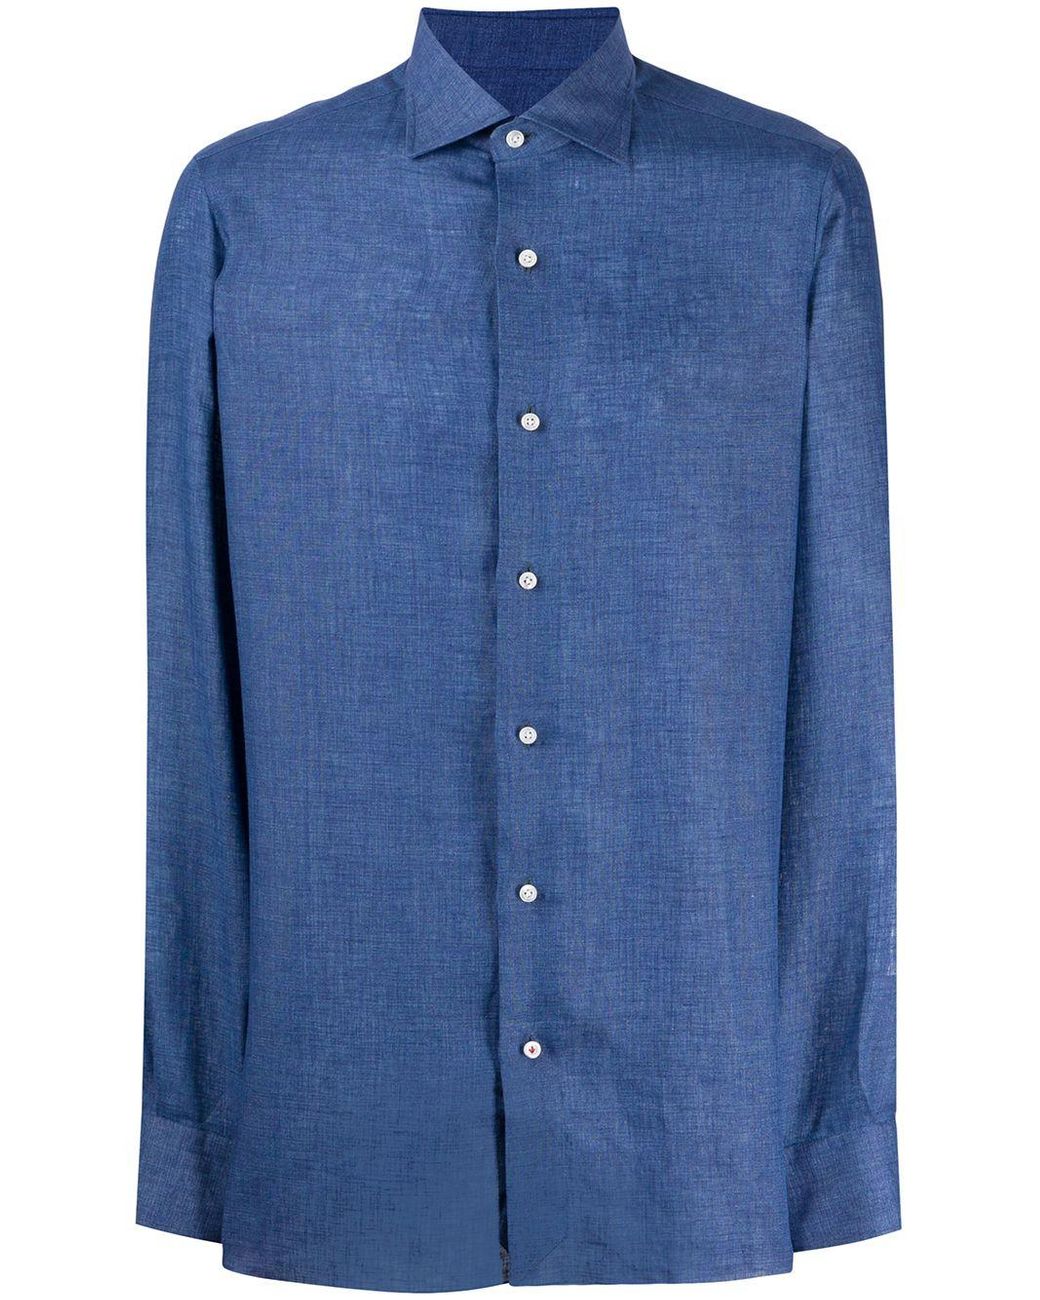 Isaia Linen Plain Shirt in Blue for Men - Save 8% - Lyst